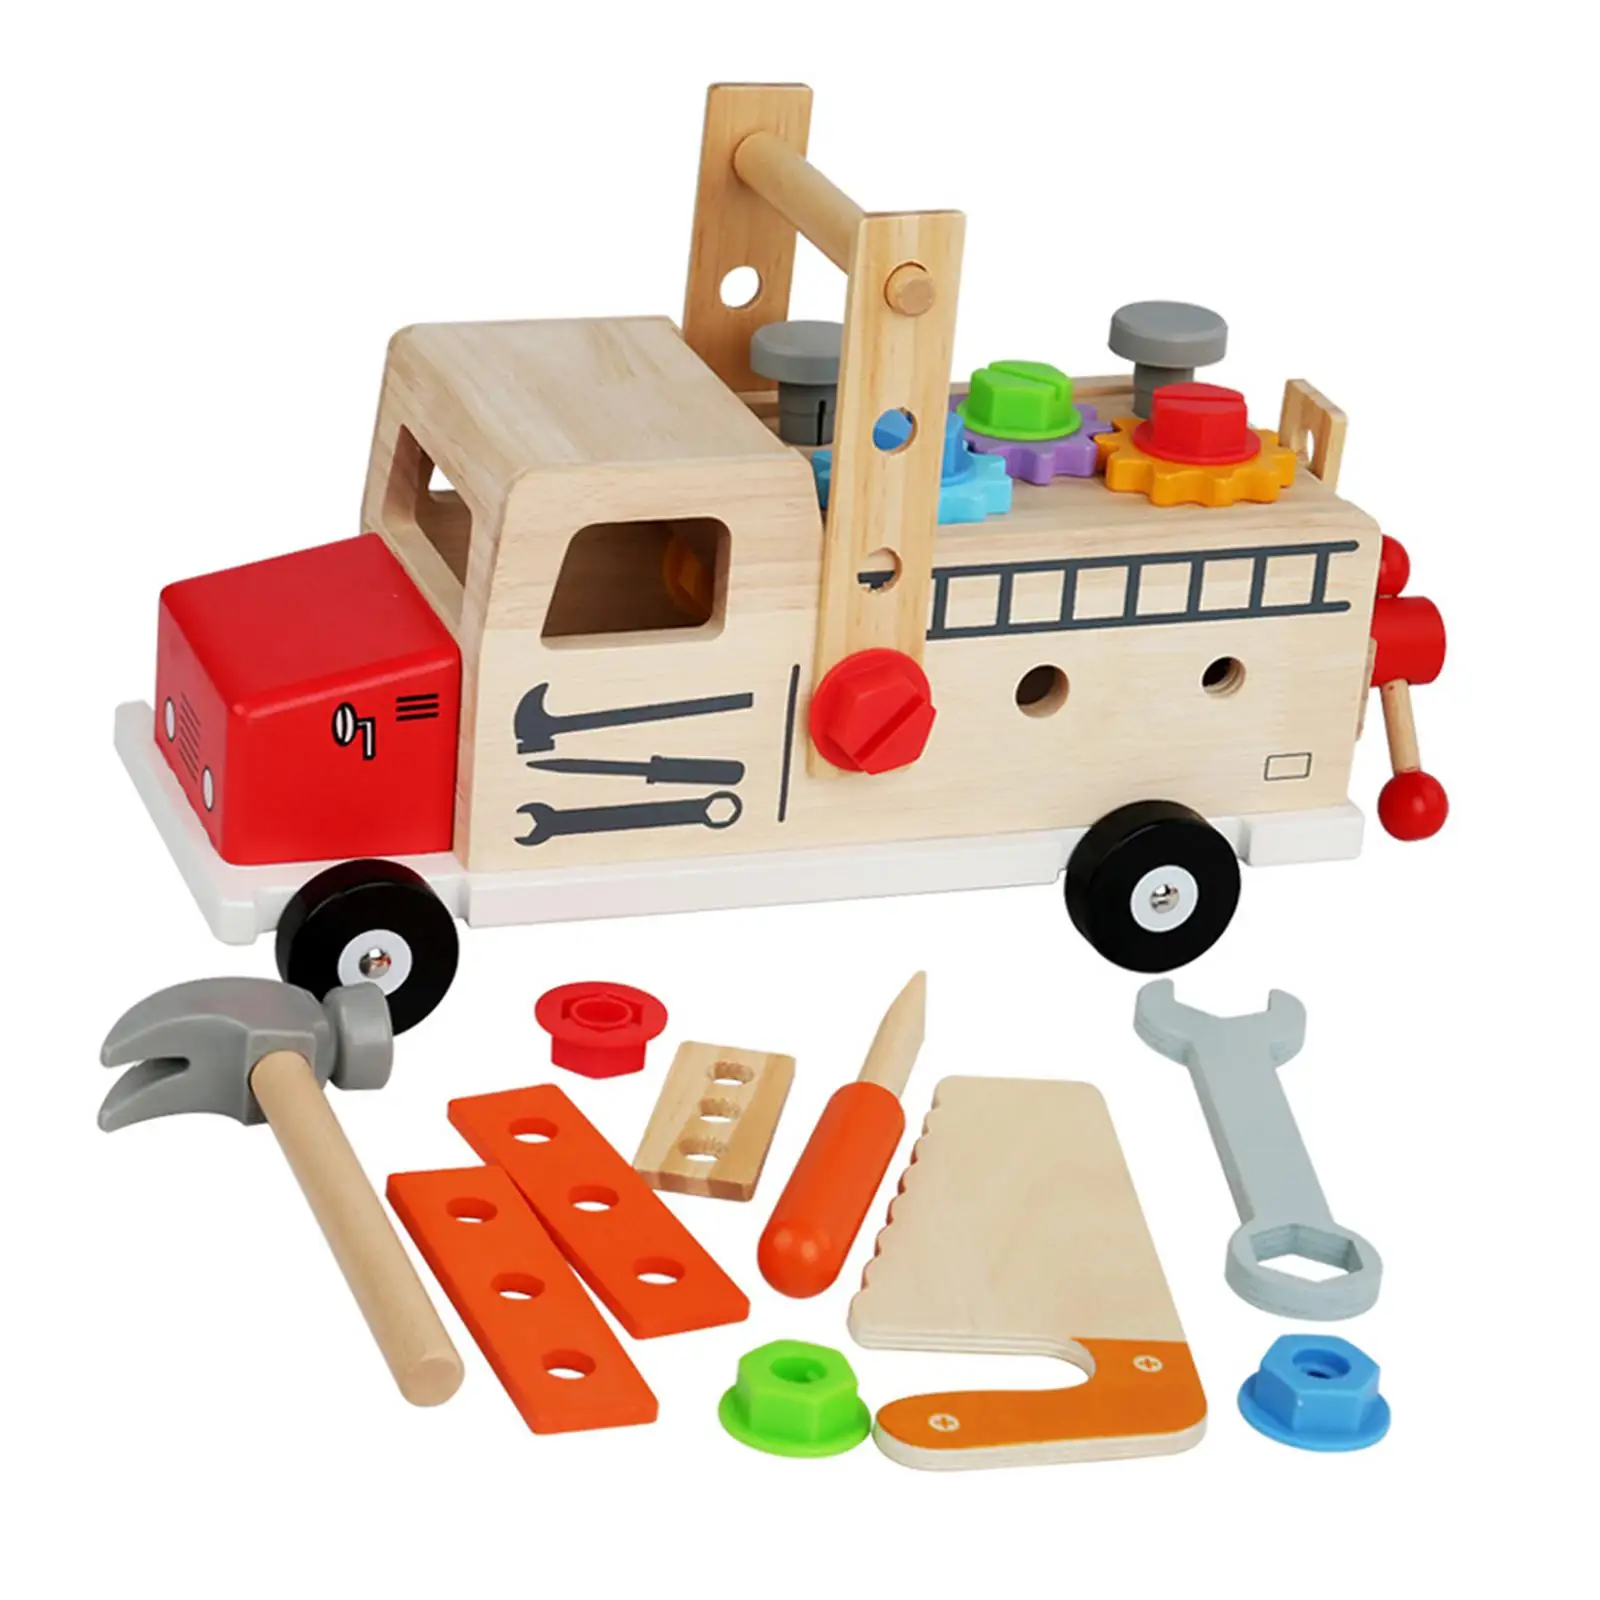 Construction Toy Stem Wood Kids Tool Set Pretend Play Tool Kits for Children Kid 3 4 5 6 Years Old Boys Girls Xmas Present